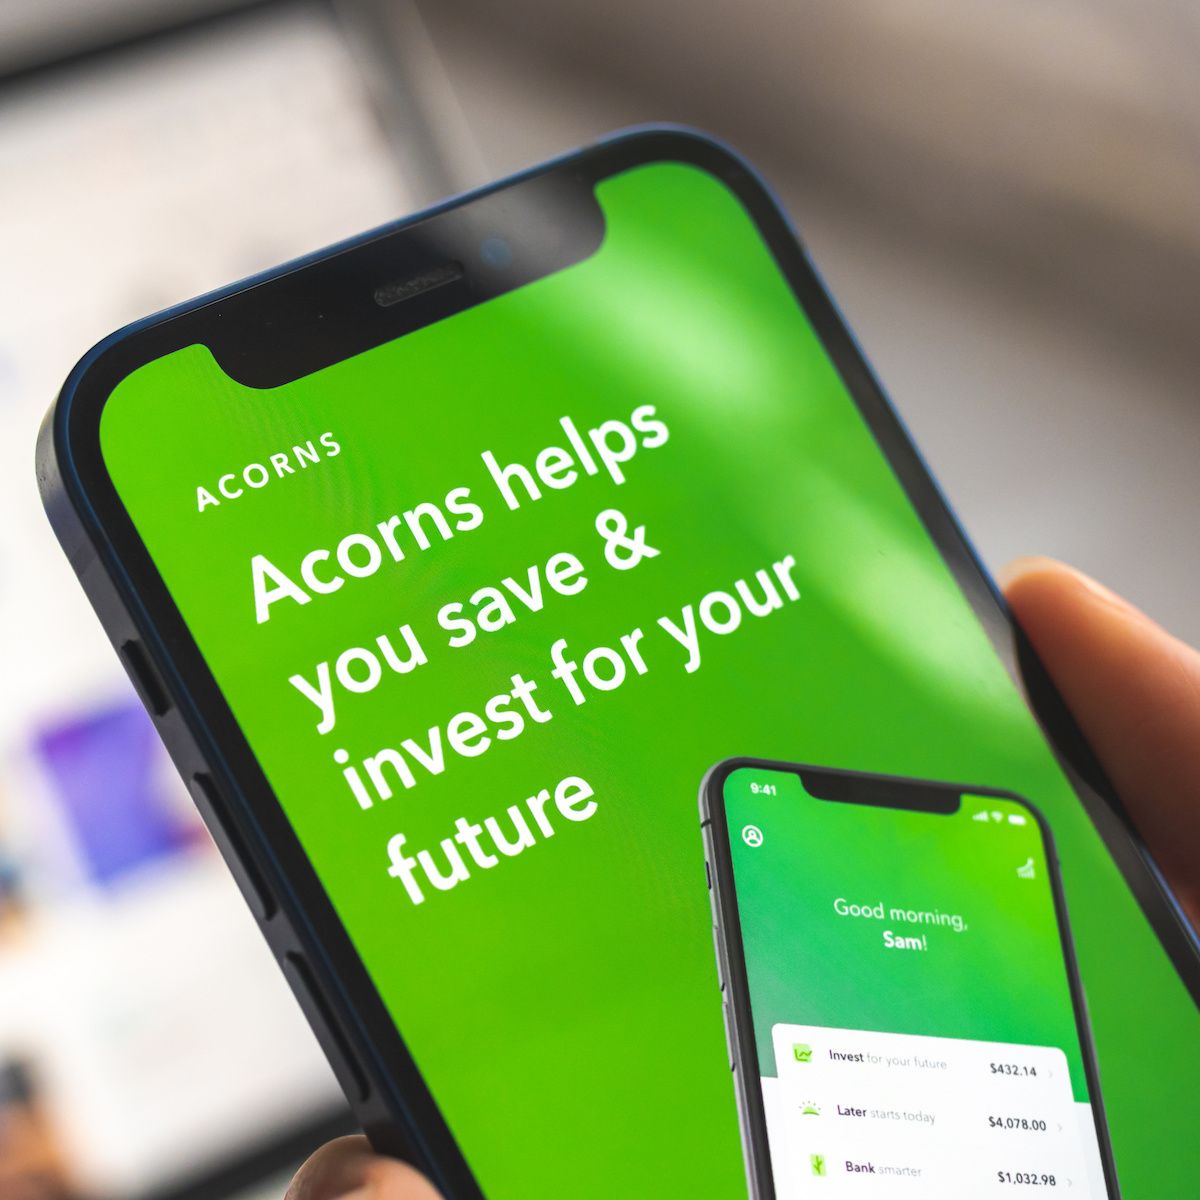 Acorns is an investment app and most likely a secure way to keep your savings safe.